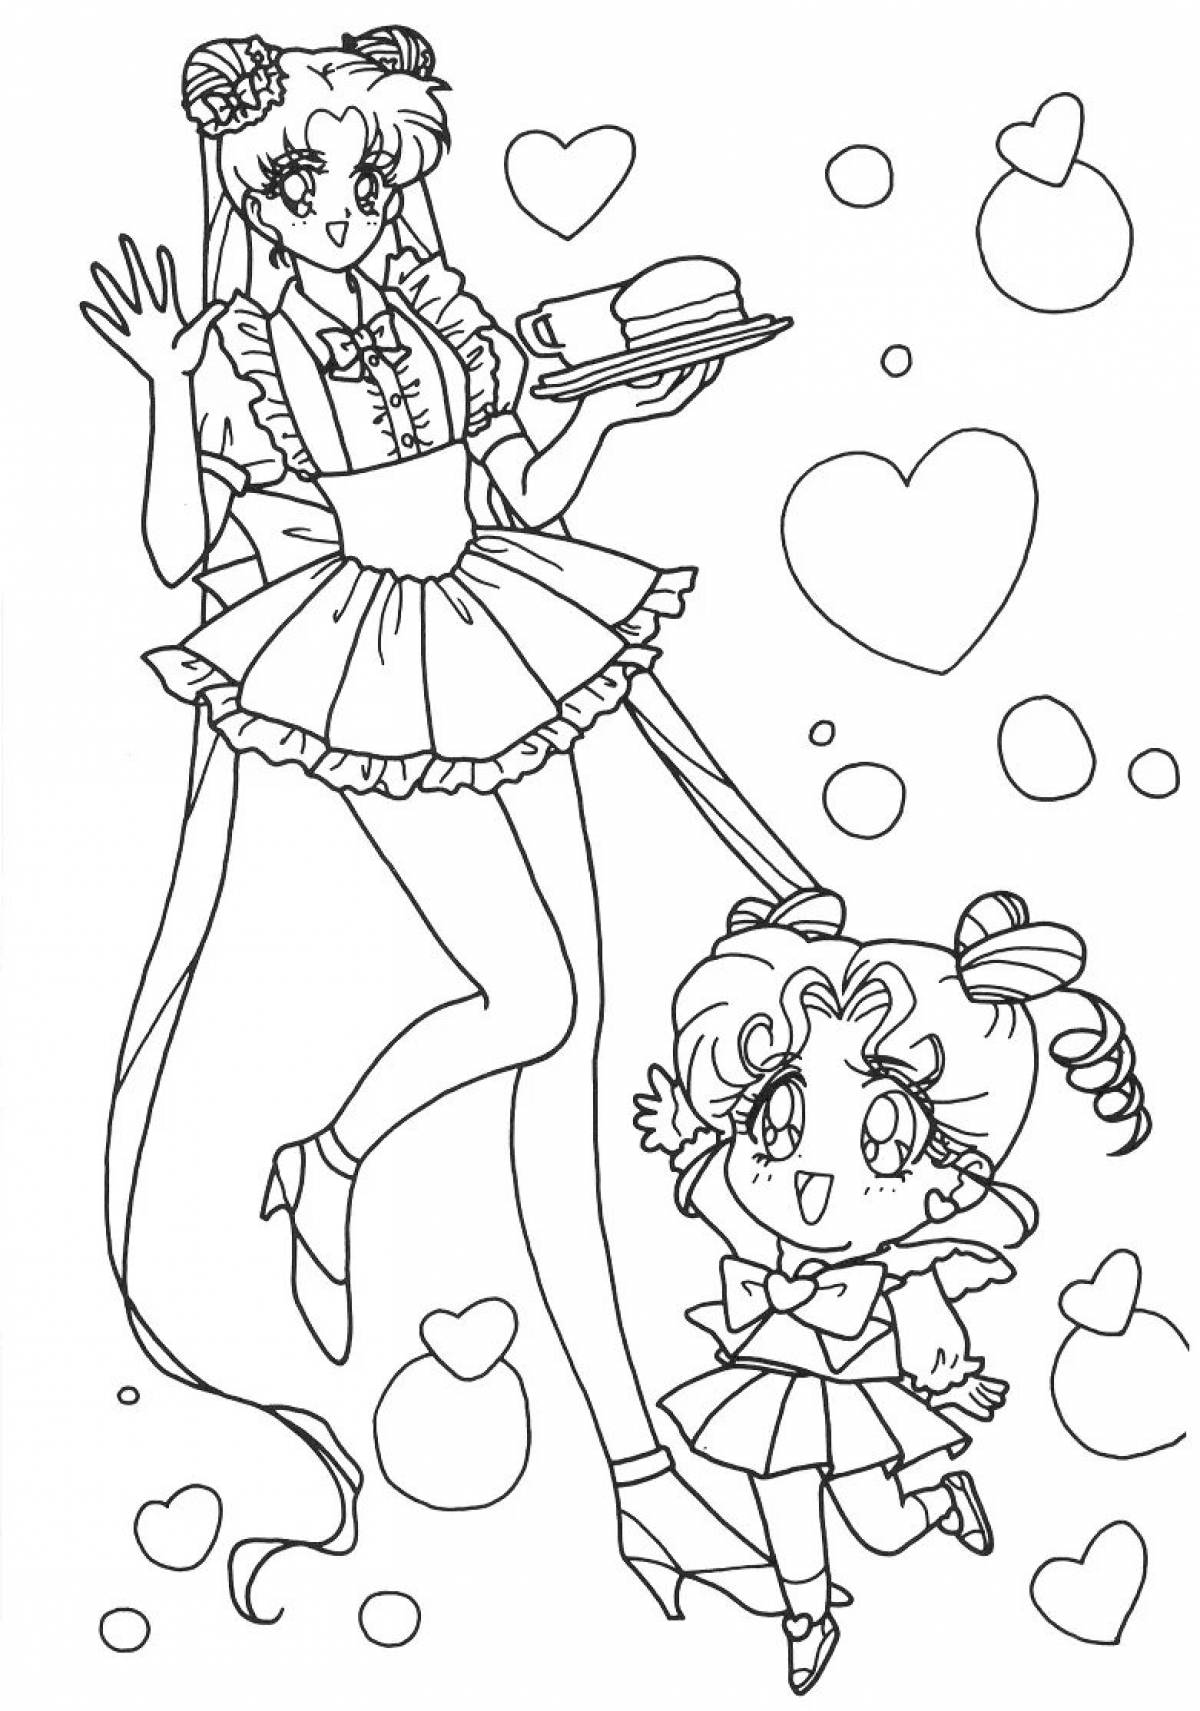 Comic coloring book for girls sailor moon